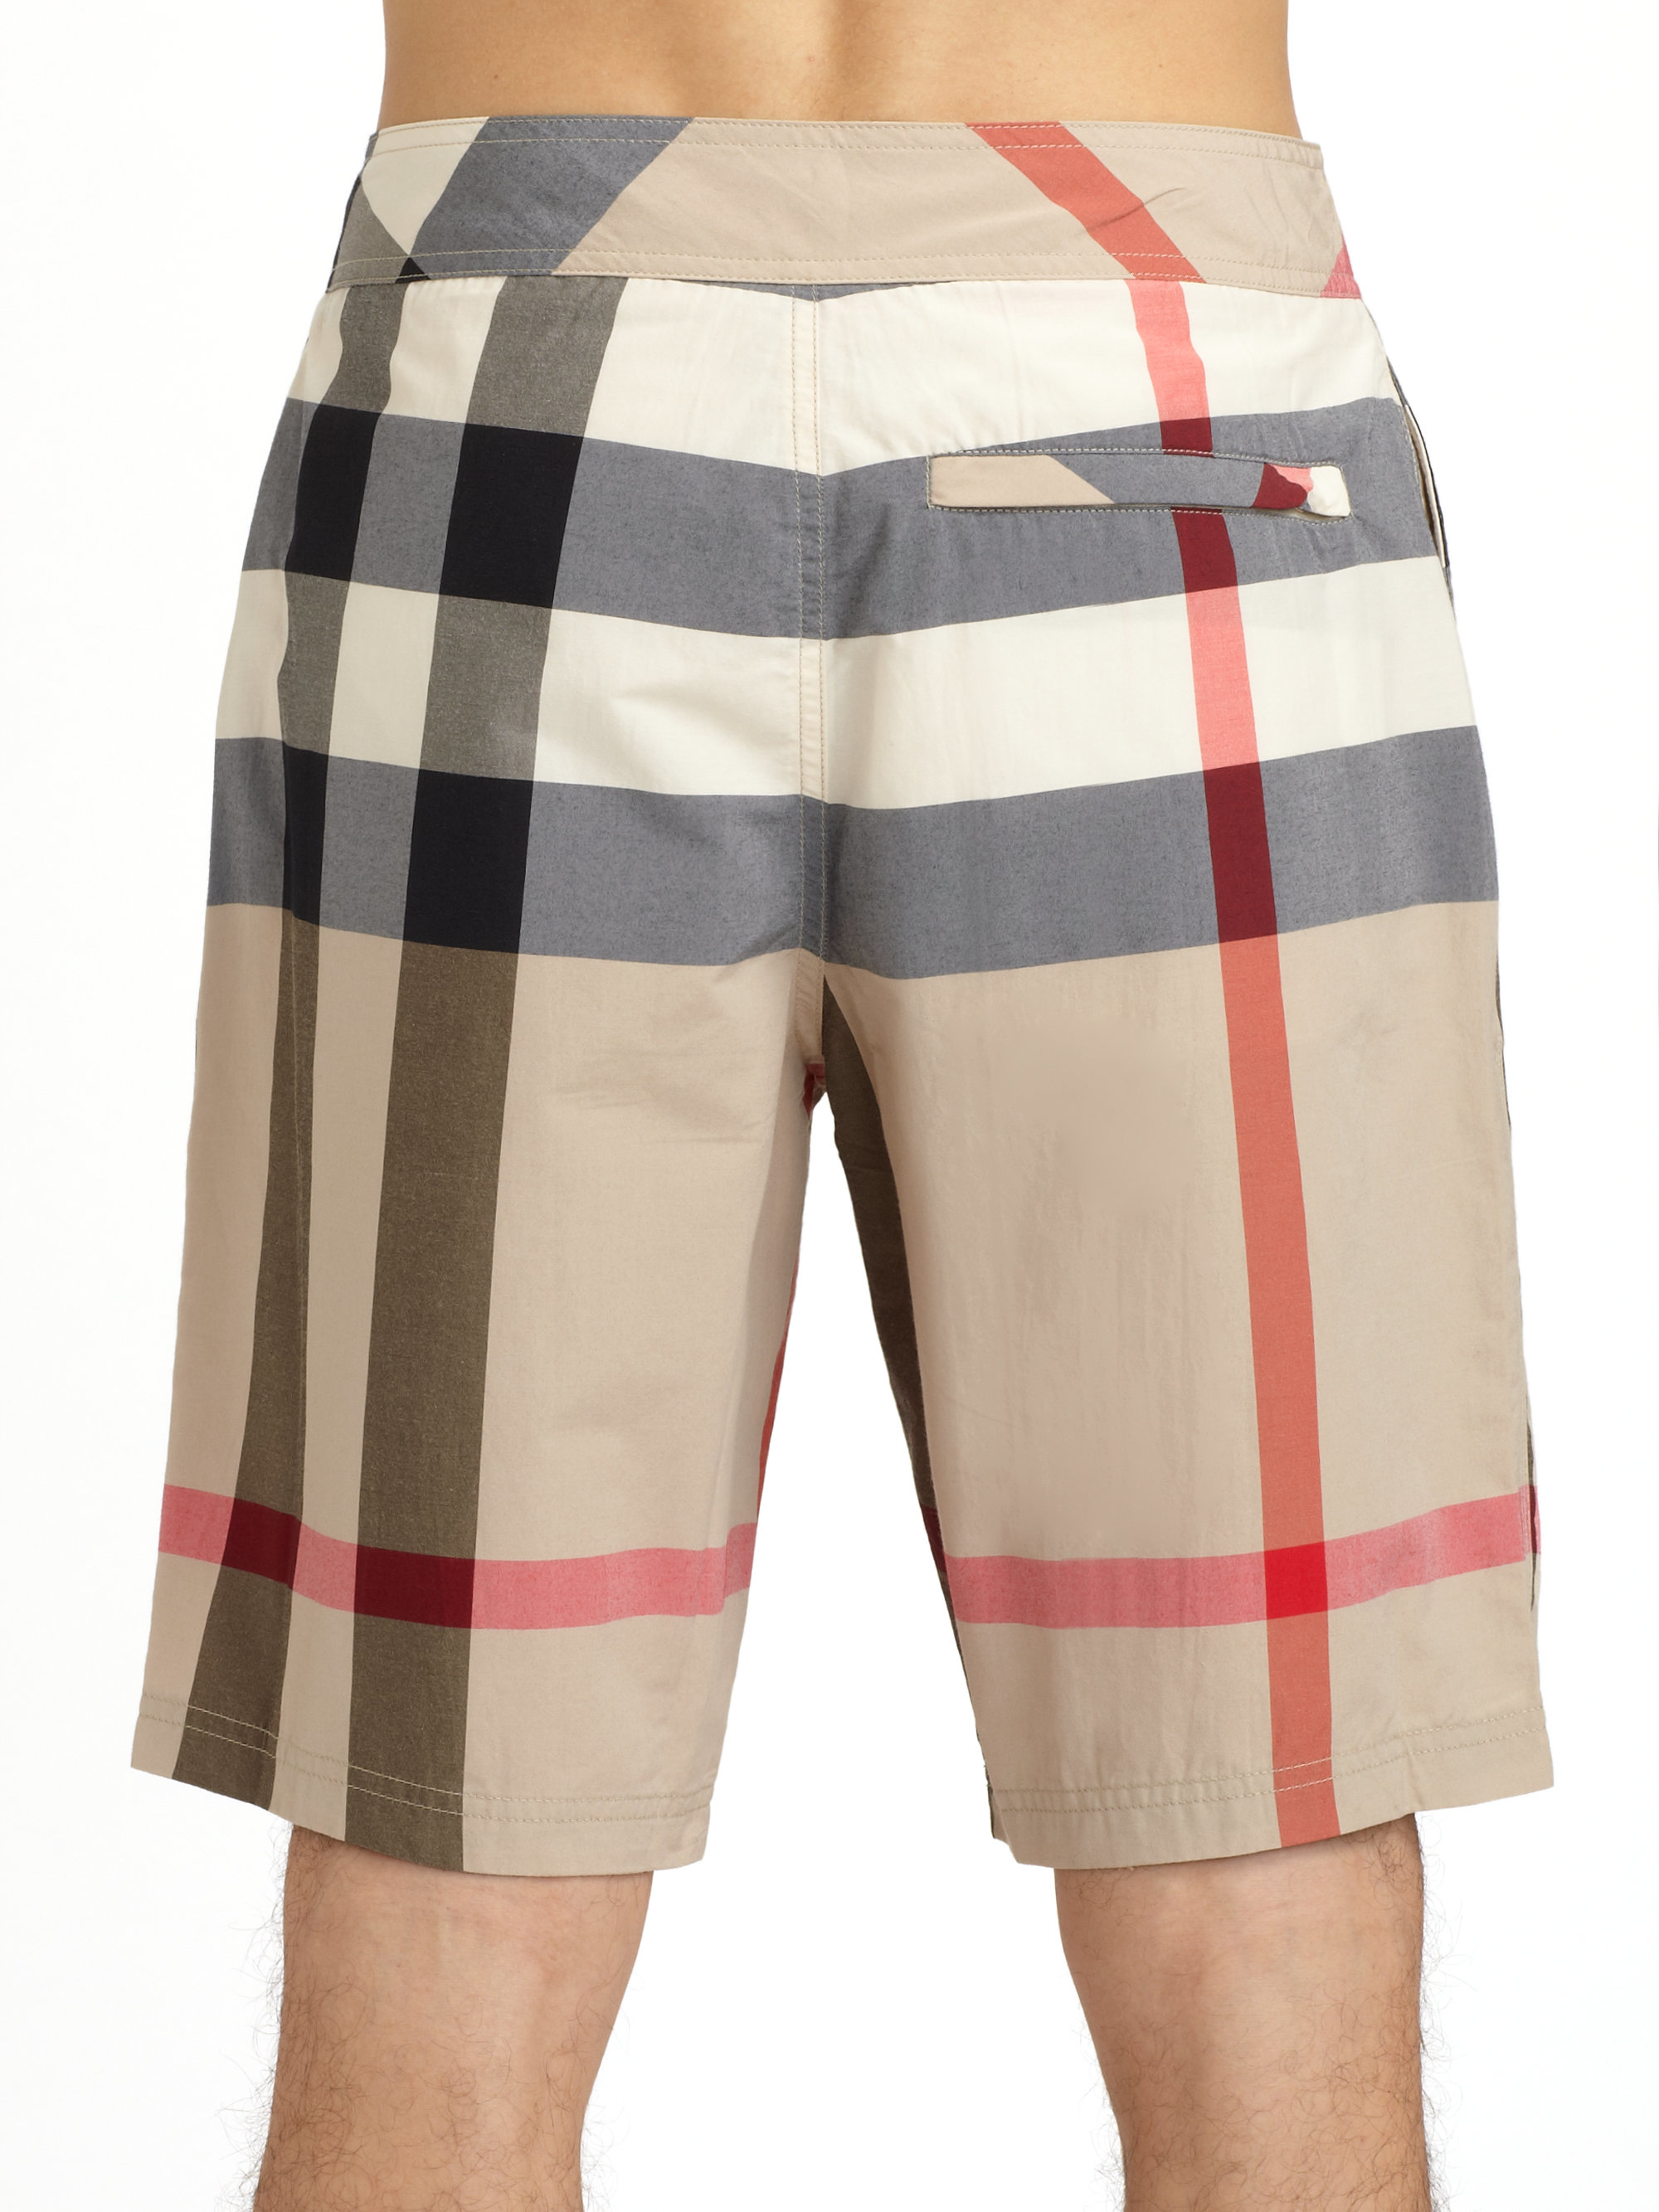 Burberry Check Swim Shorts Outlet, SAVE 53%.